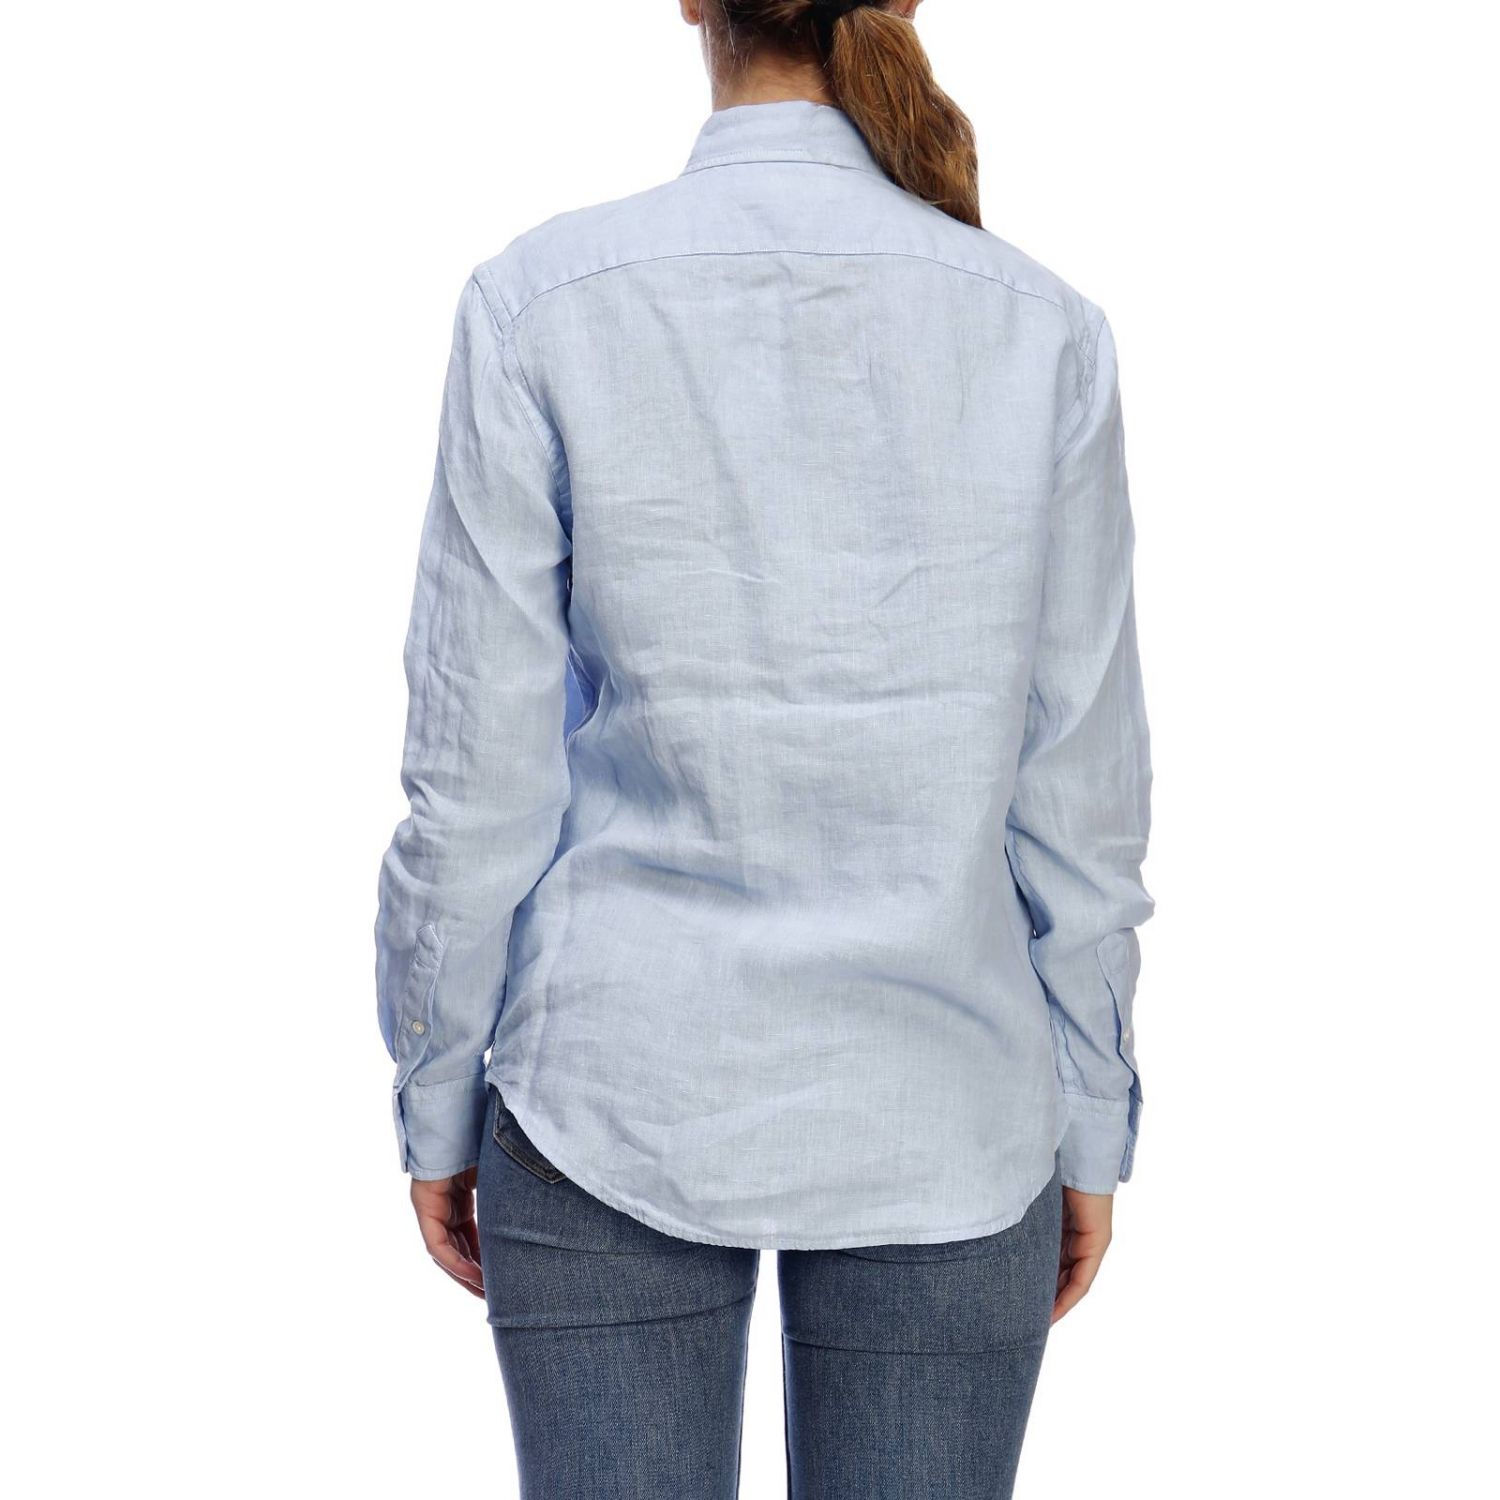 Polo Ralph Lauren Outlet: shirt for woman - Gnawed Blue | Polo Ralph